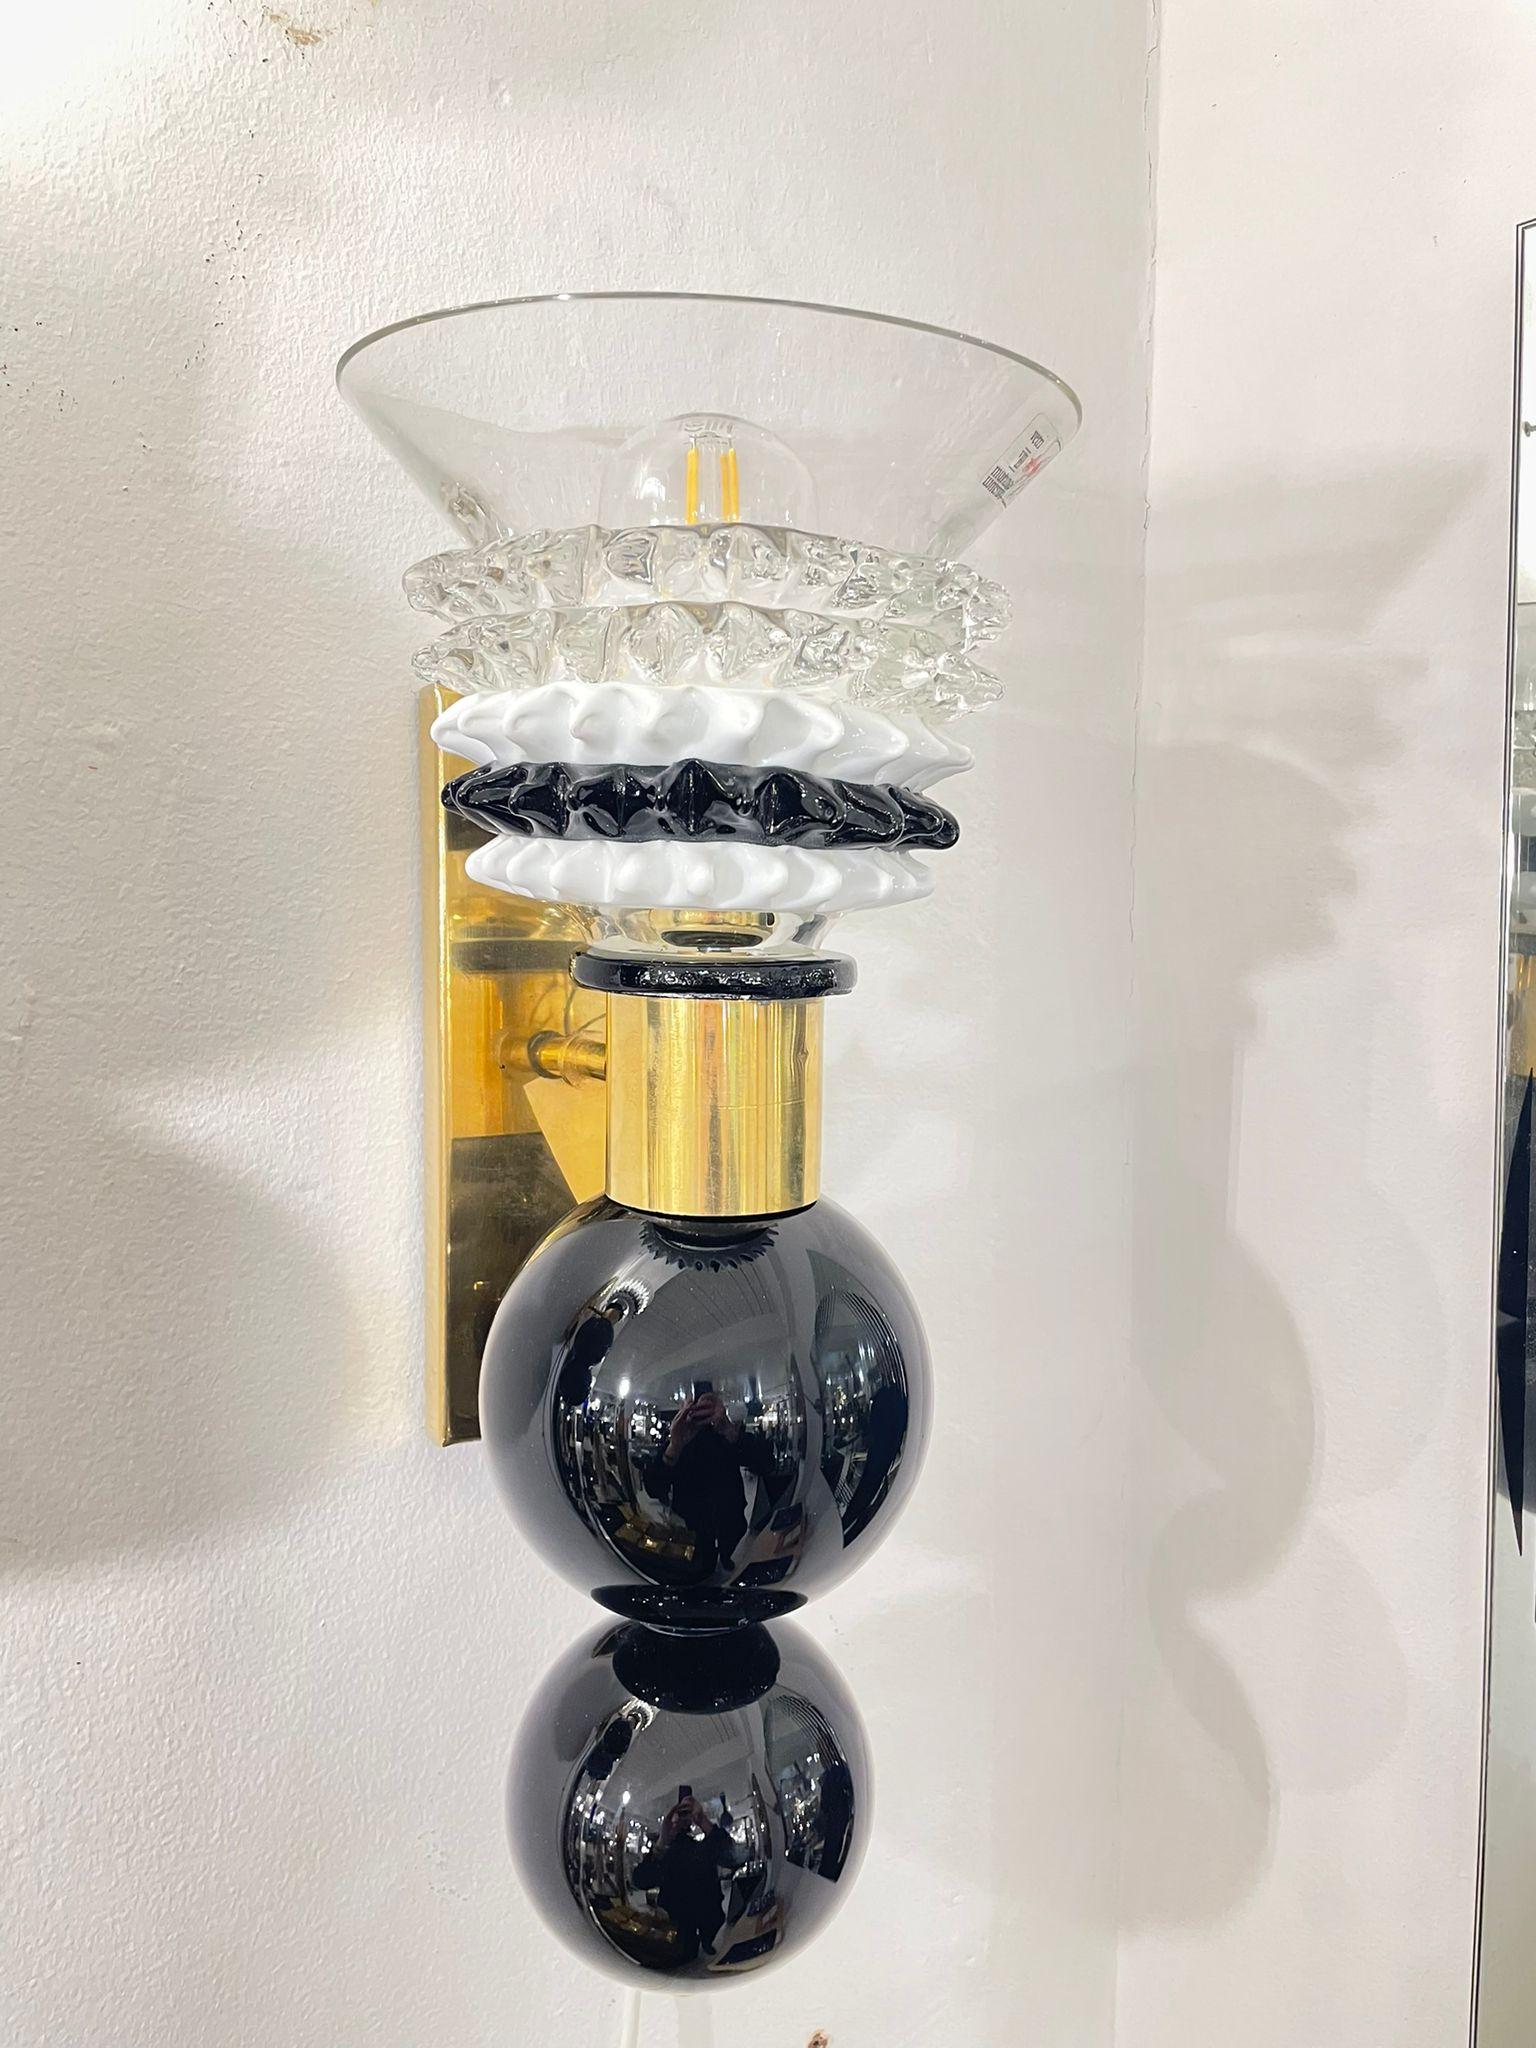 A rare hand blown Murano glass wall lights/sconces by the renowned glass manufacturer Barovier & Toso, Italy, 1960s The black elements with white and black glass shades give the wall lights a very elegant and unique design. 
The wall lights are in